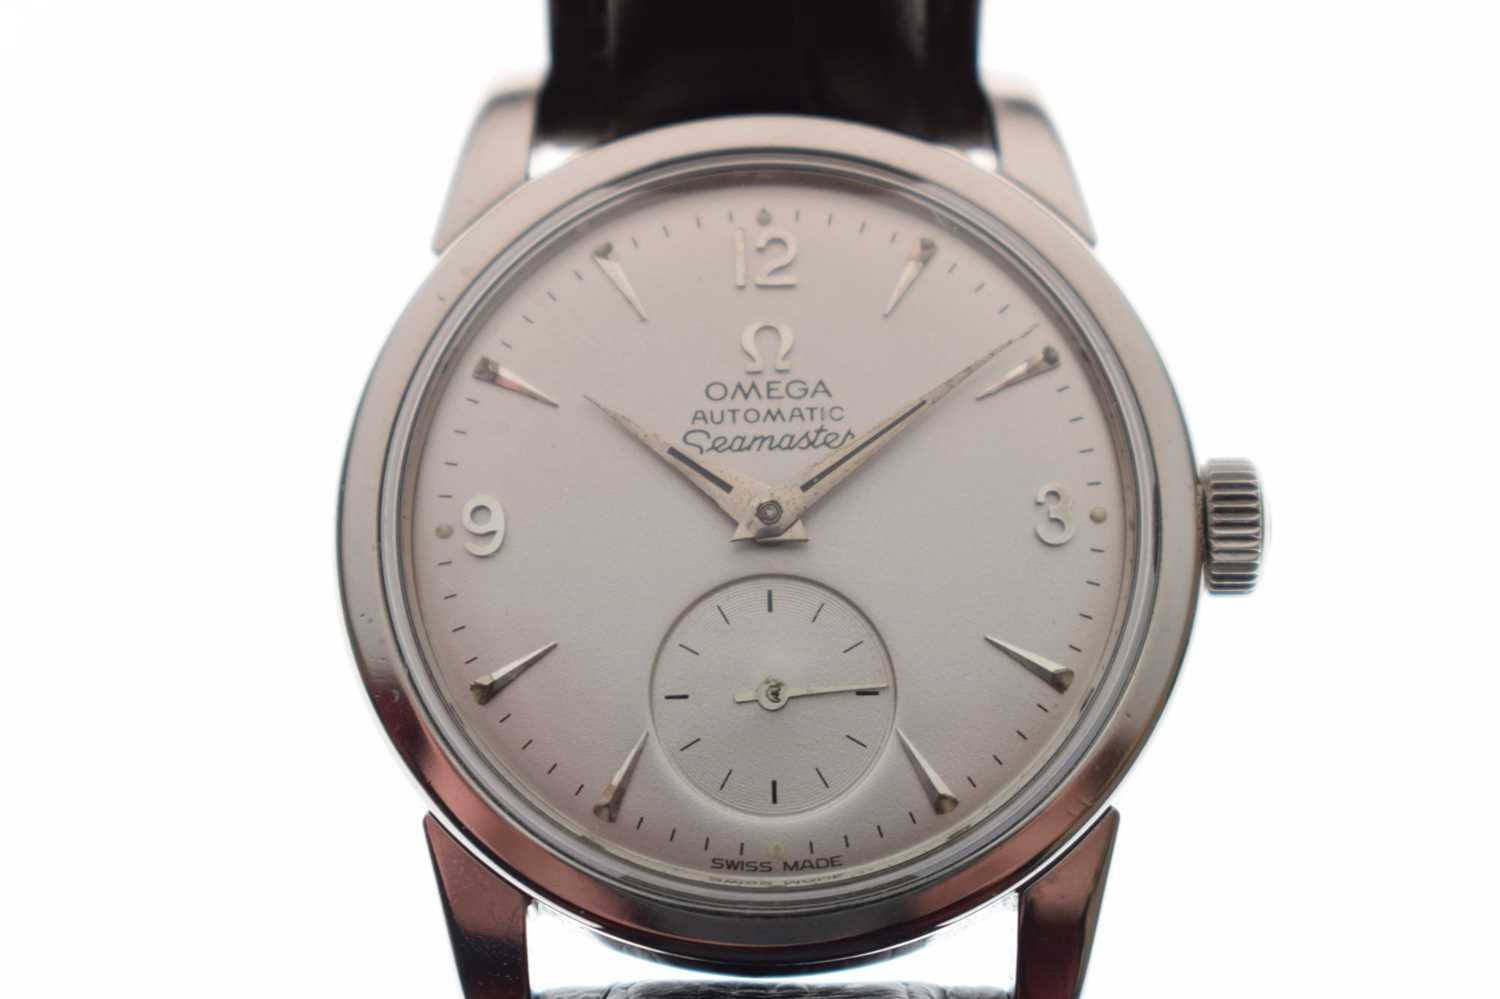 Omega - Gentleman's Seamaster stainless steel cased wristwatch - Image 3 of 9